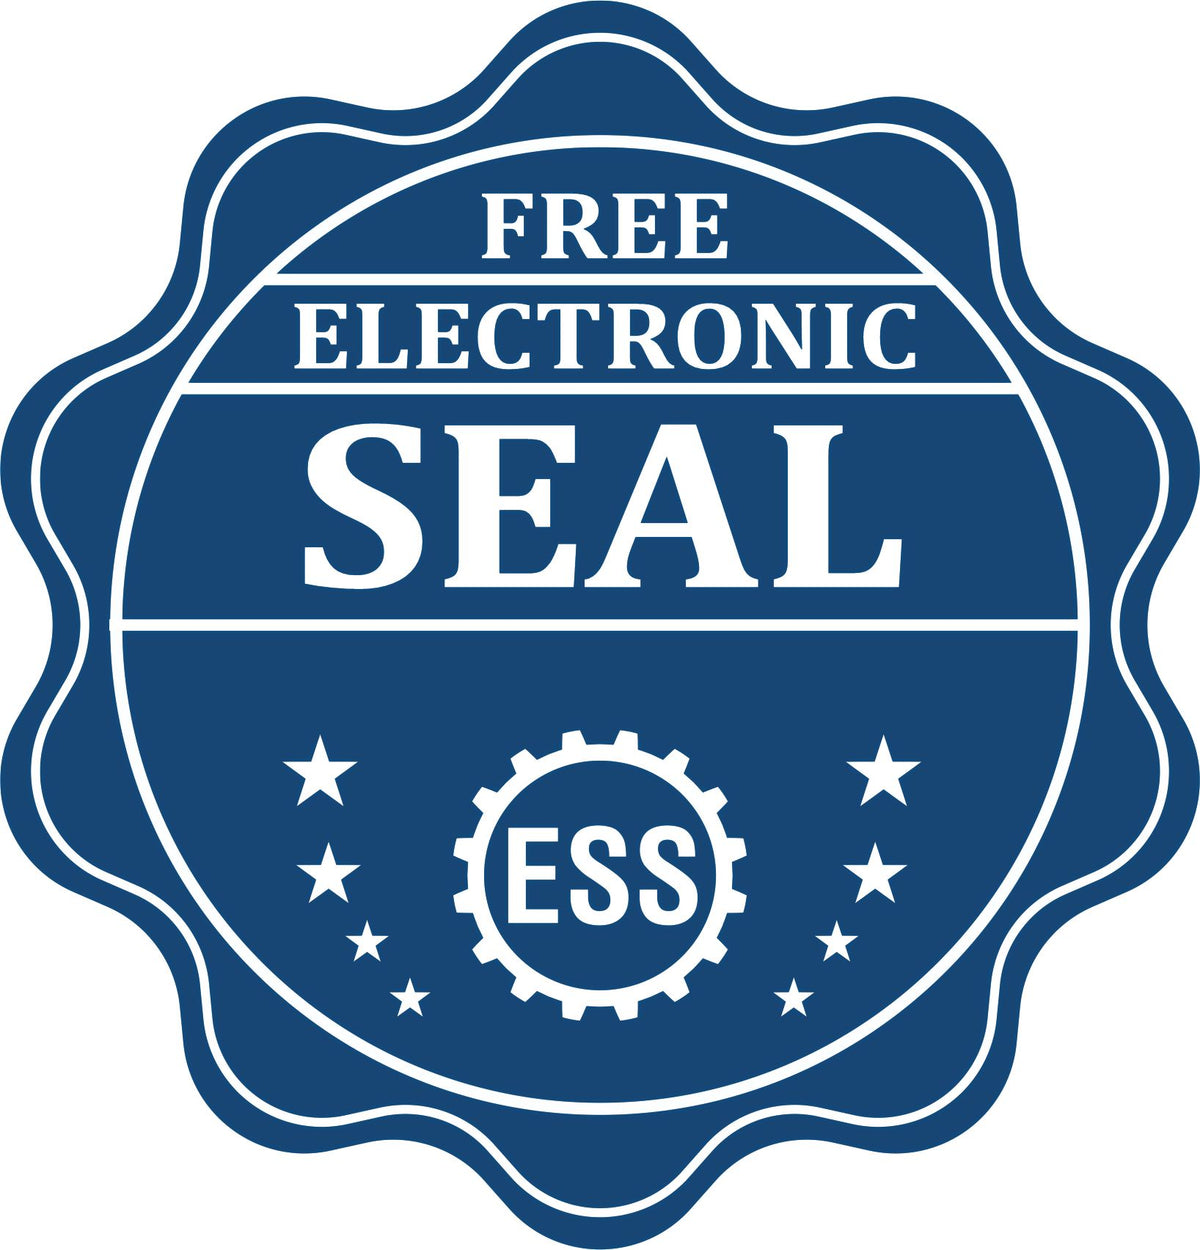 A badge showing a free electronic seal for the Soft Kentucky Professional Engineer Seal with stars and the ESS gear on the emblem.